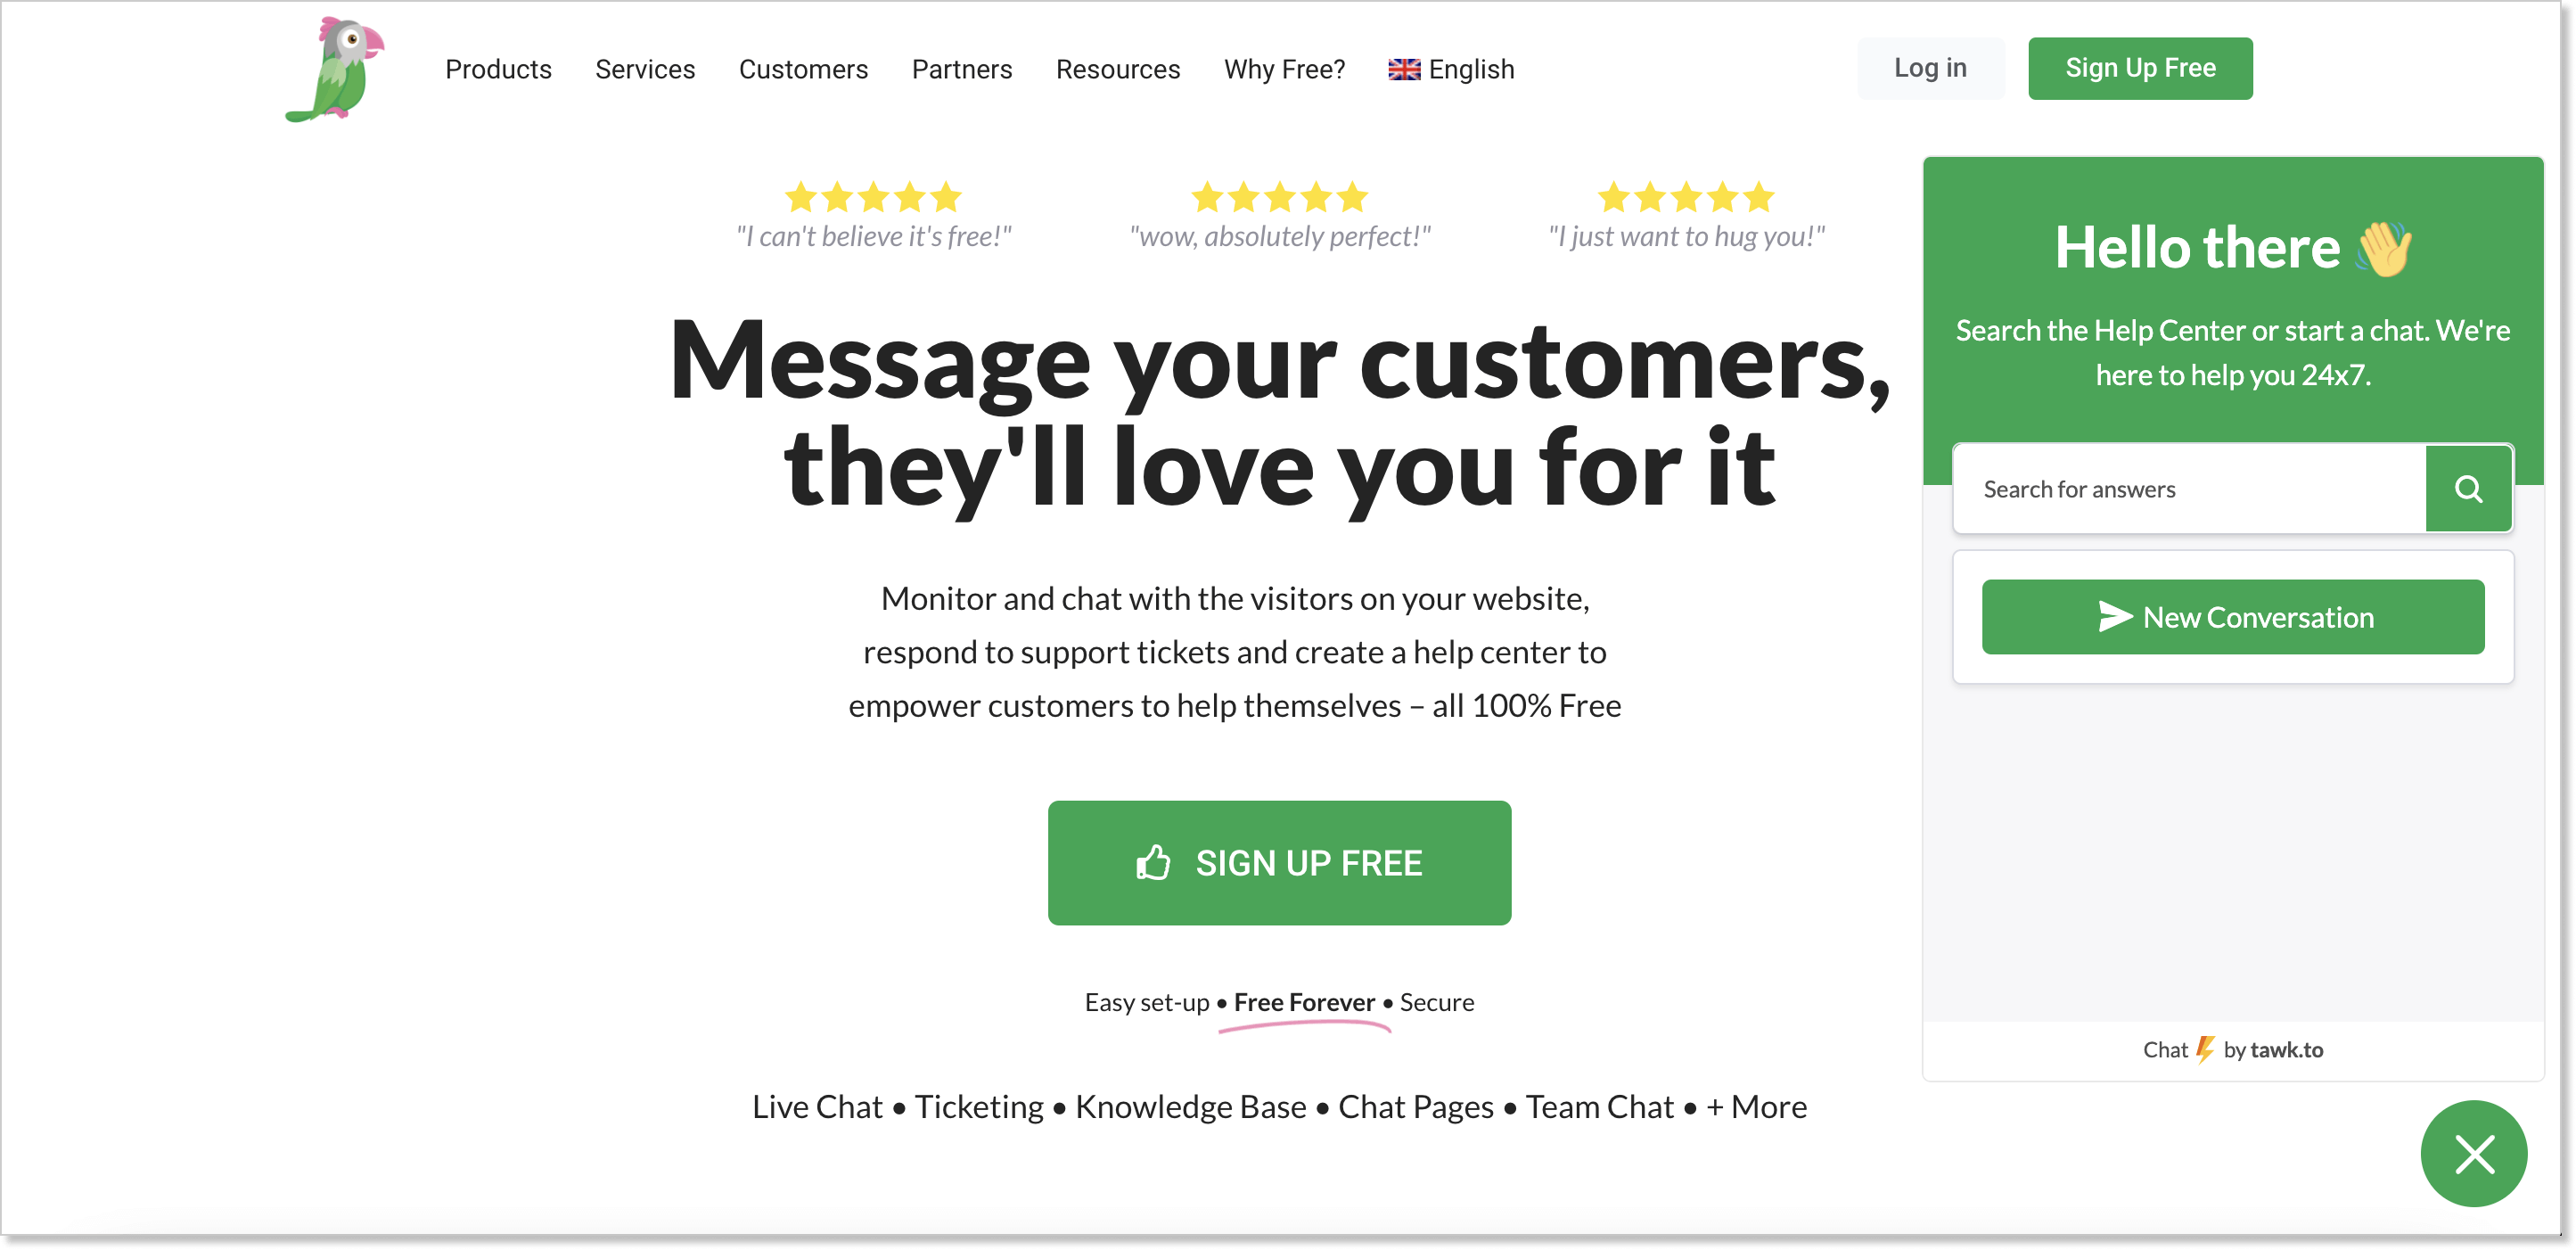 Tawk homepage with a live chat widget